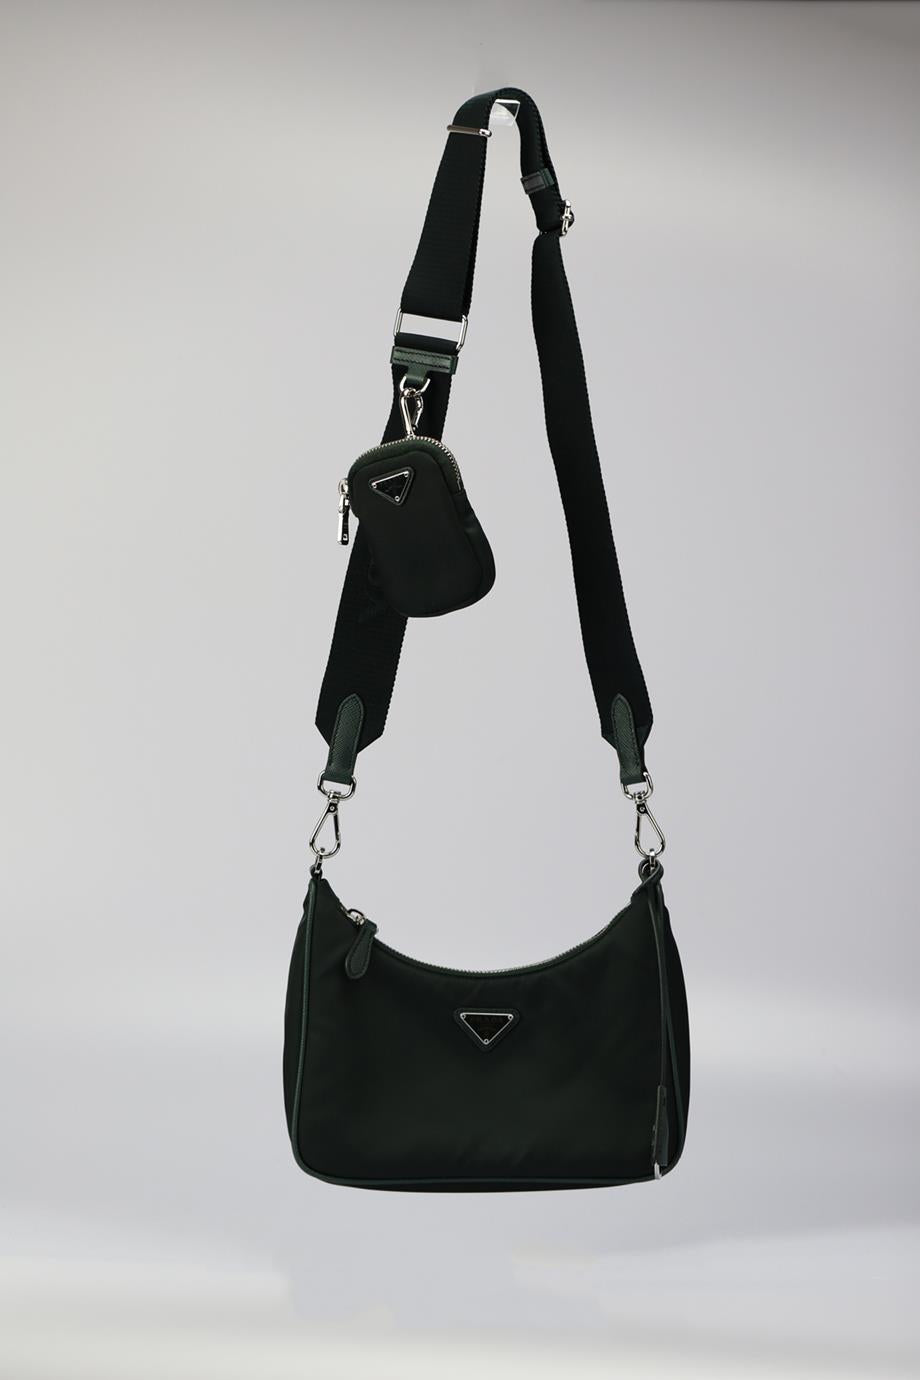 PRADA RE-EDITION 2005 TEXTURED LEATHER AND NYLON SHOULDER BAG